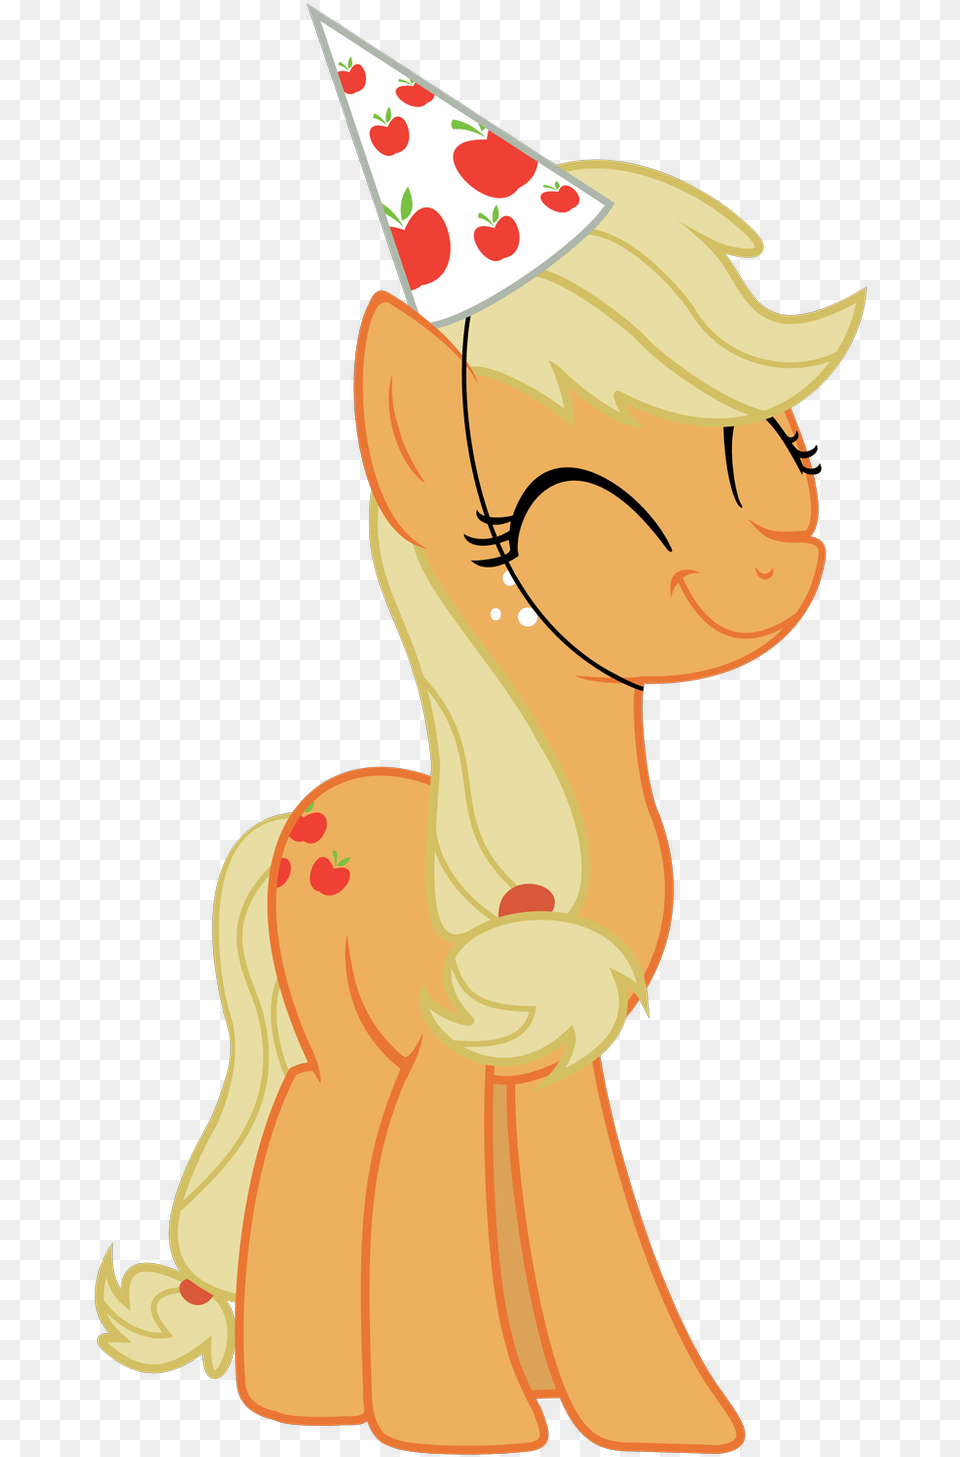 Applejack In A Party Hat By Stricer555 D My Little Pony Filly Applejack, Clothing, Baby, Person, Party Hat Free Png